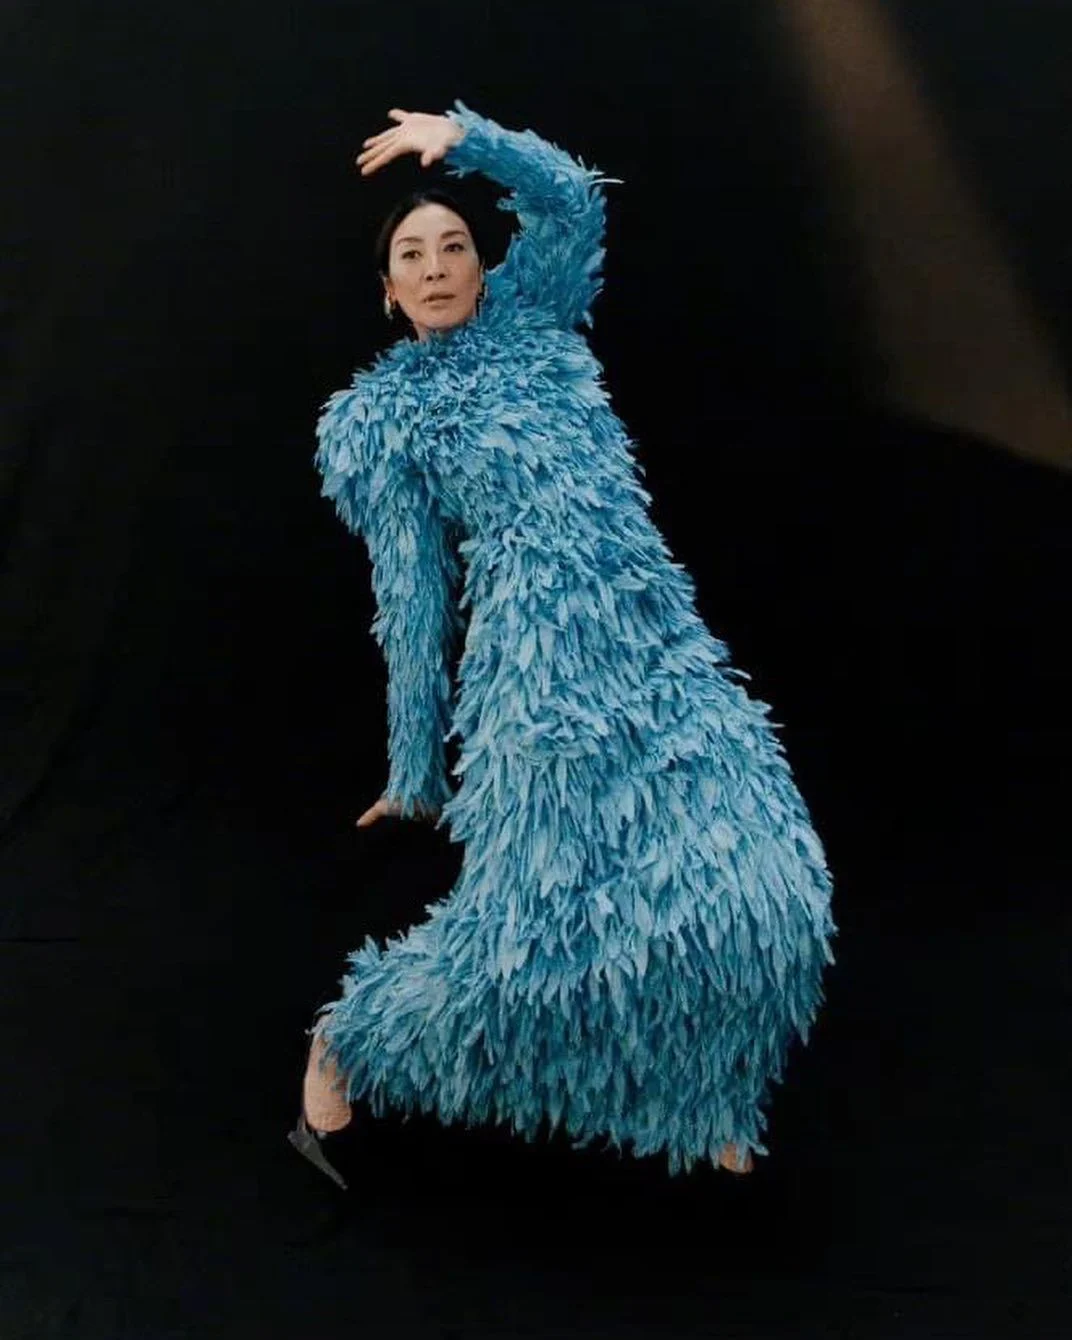 October 2022 saw her adorned in a long-sleeved blue feathered gown for Vogue China.